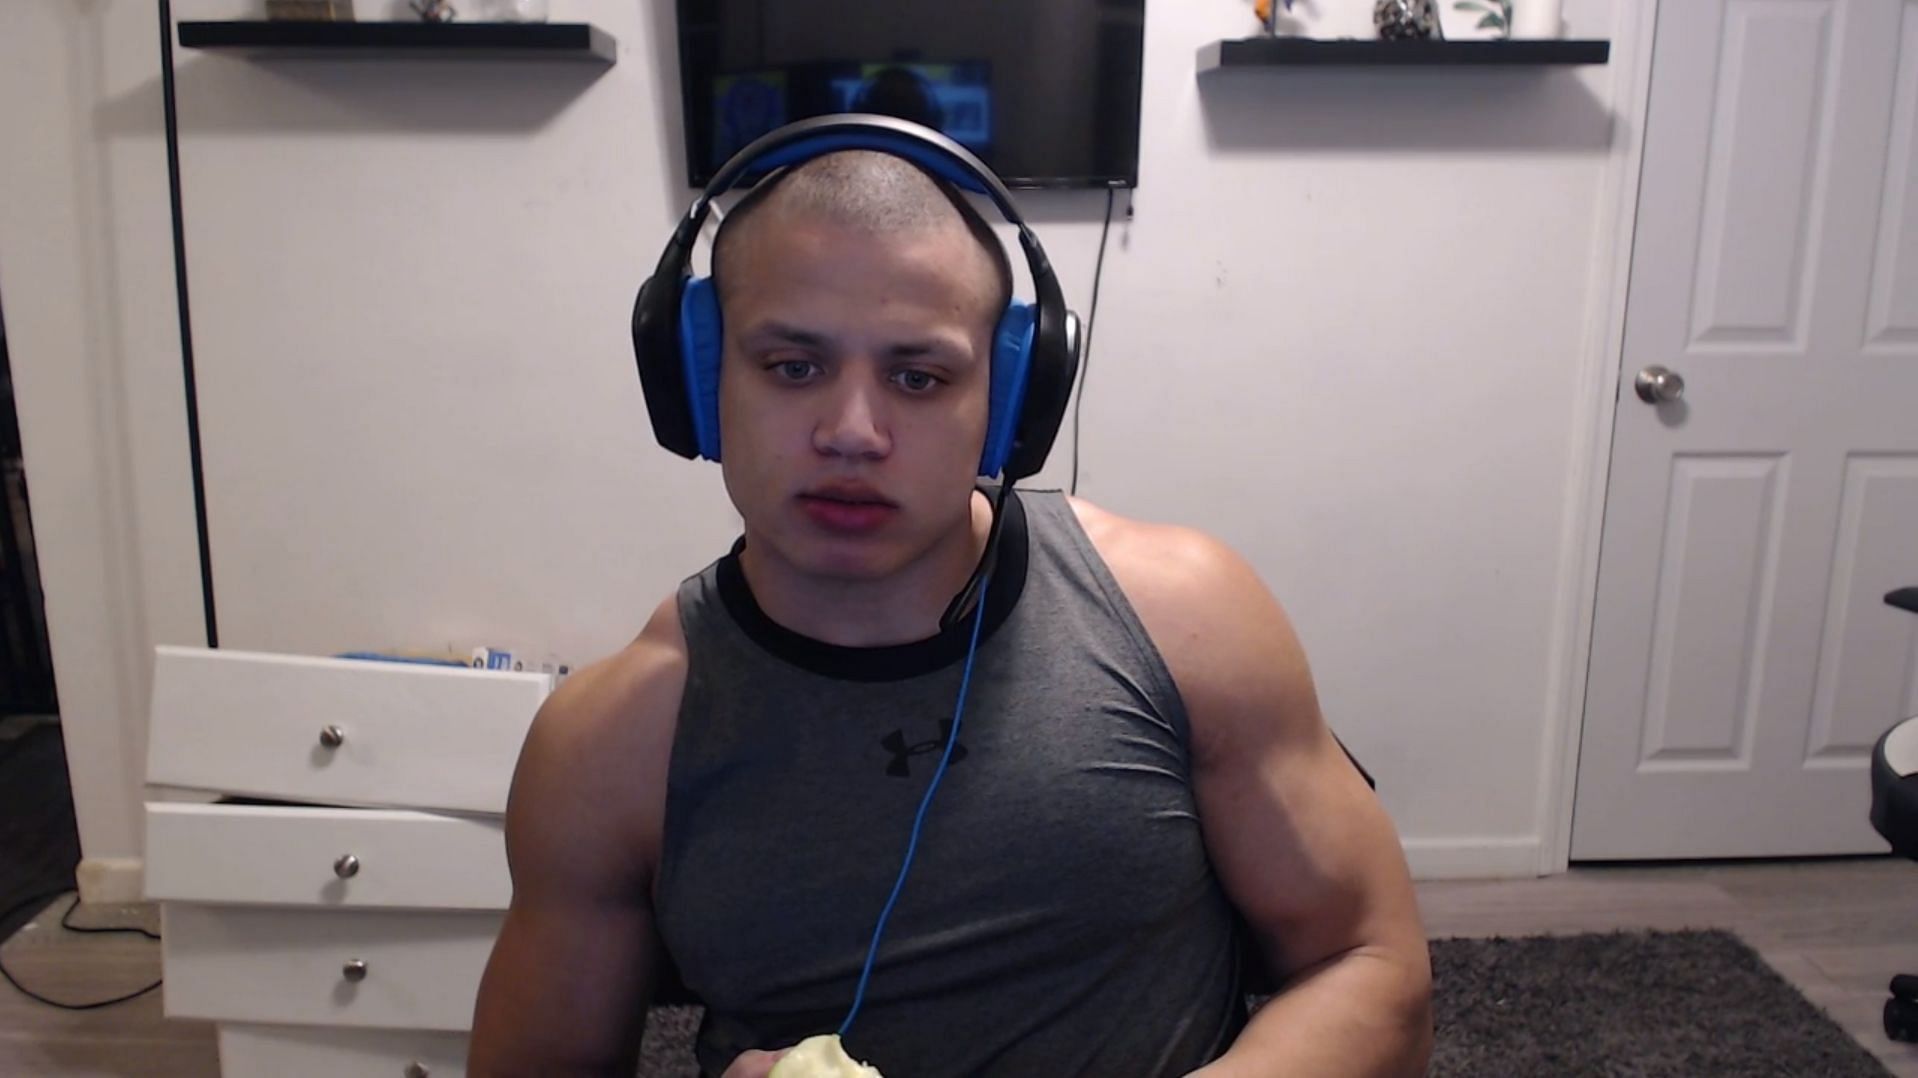 Tyler1 got hilariously stream-sniped during a Fornite livestream. (Image via Tyler1)